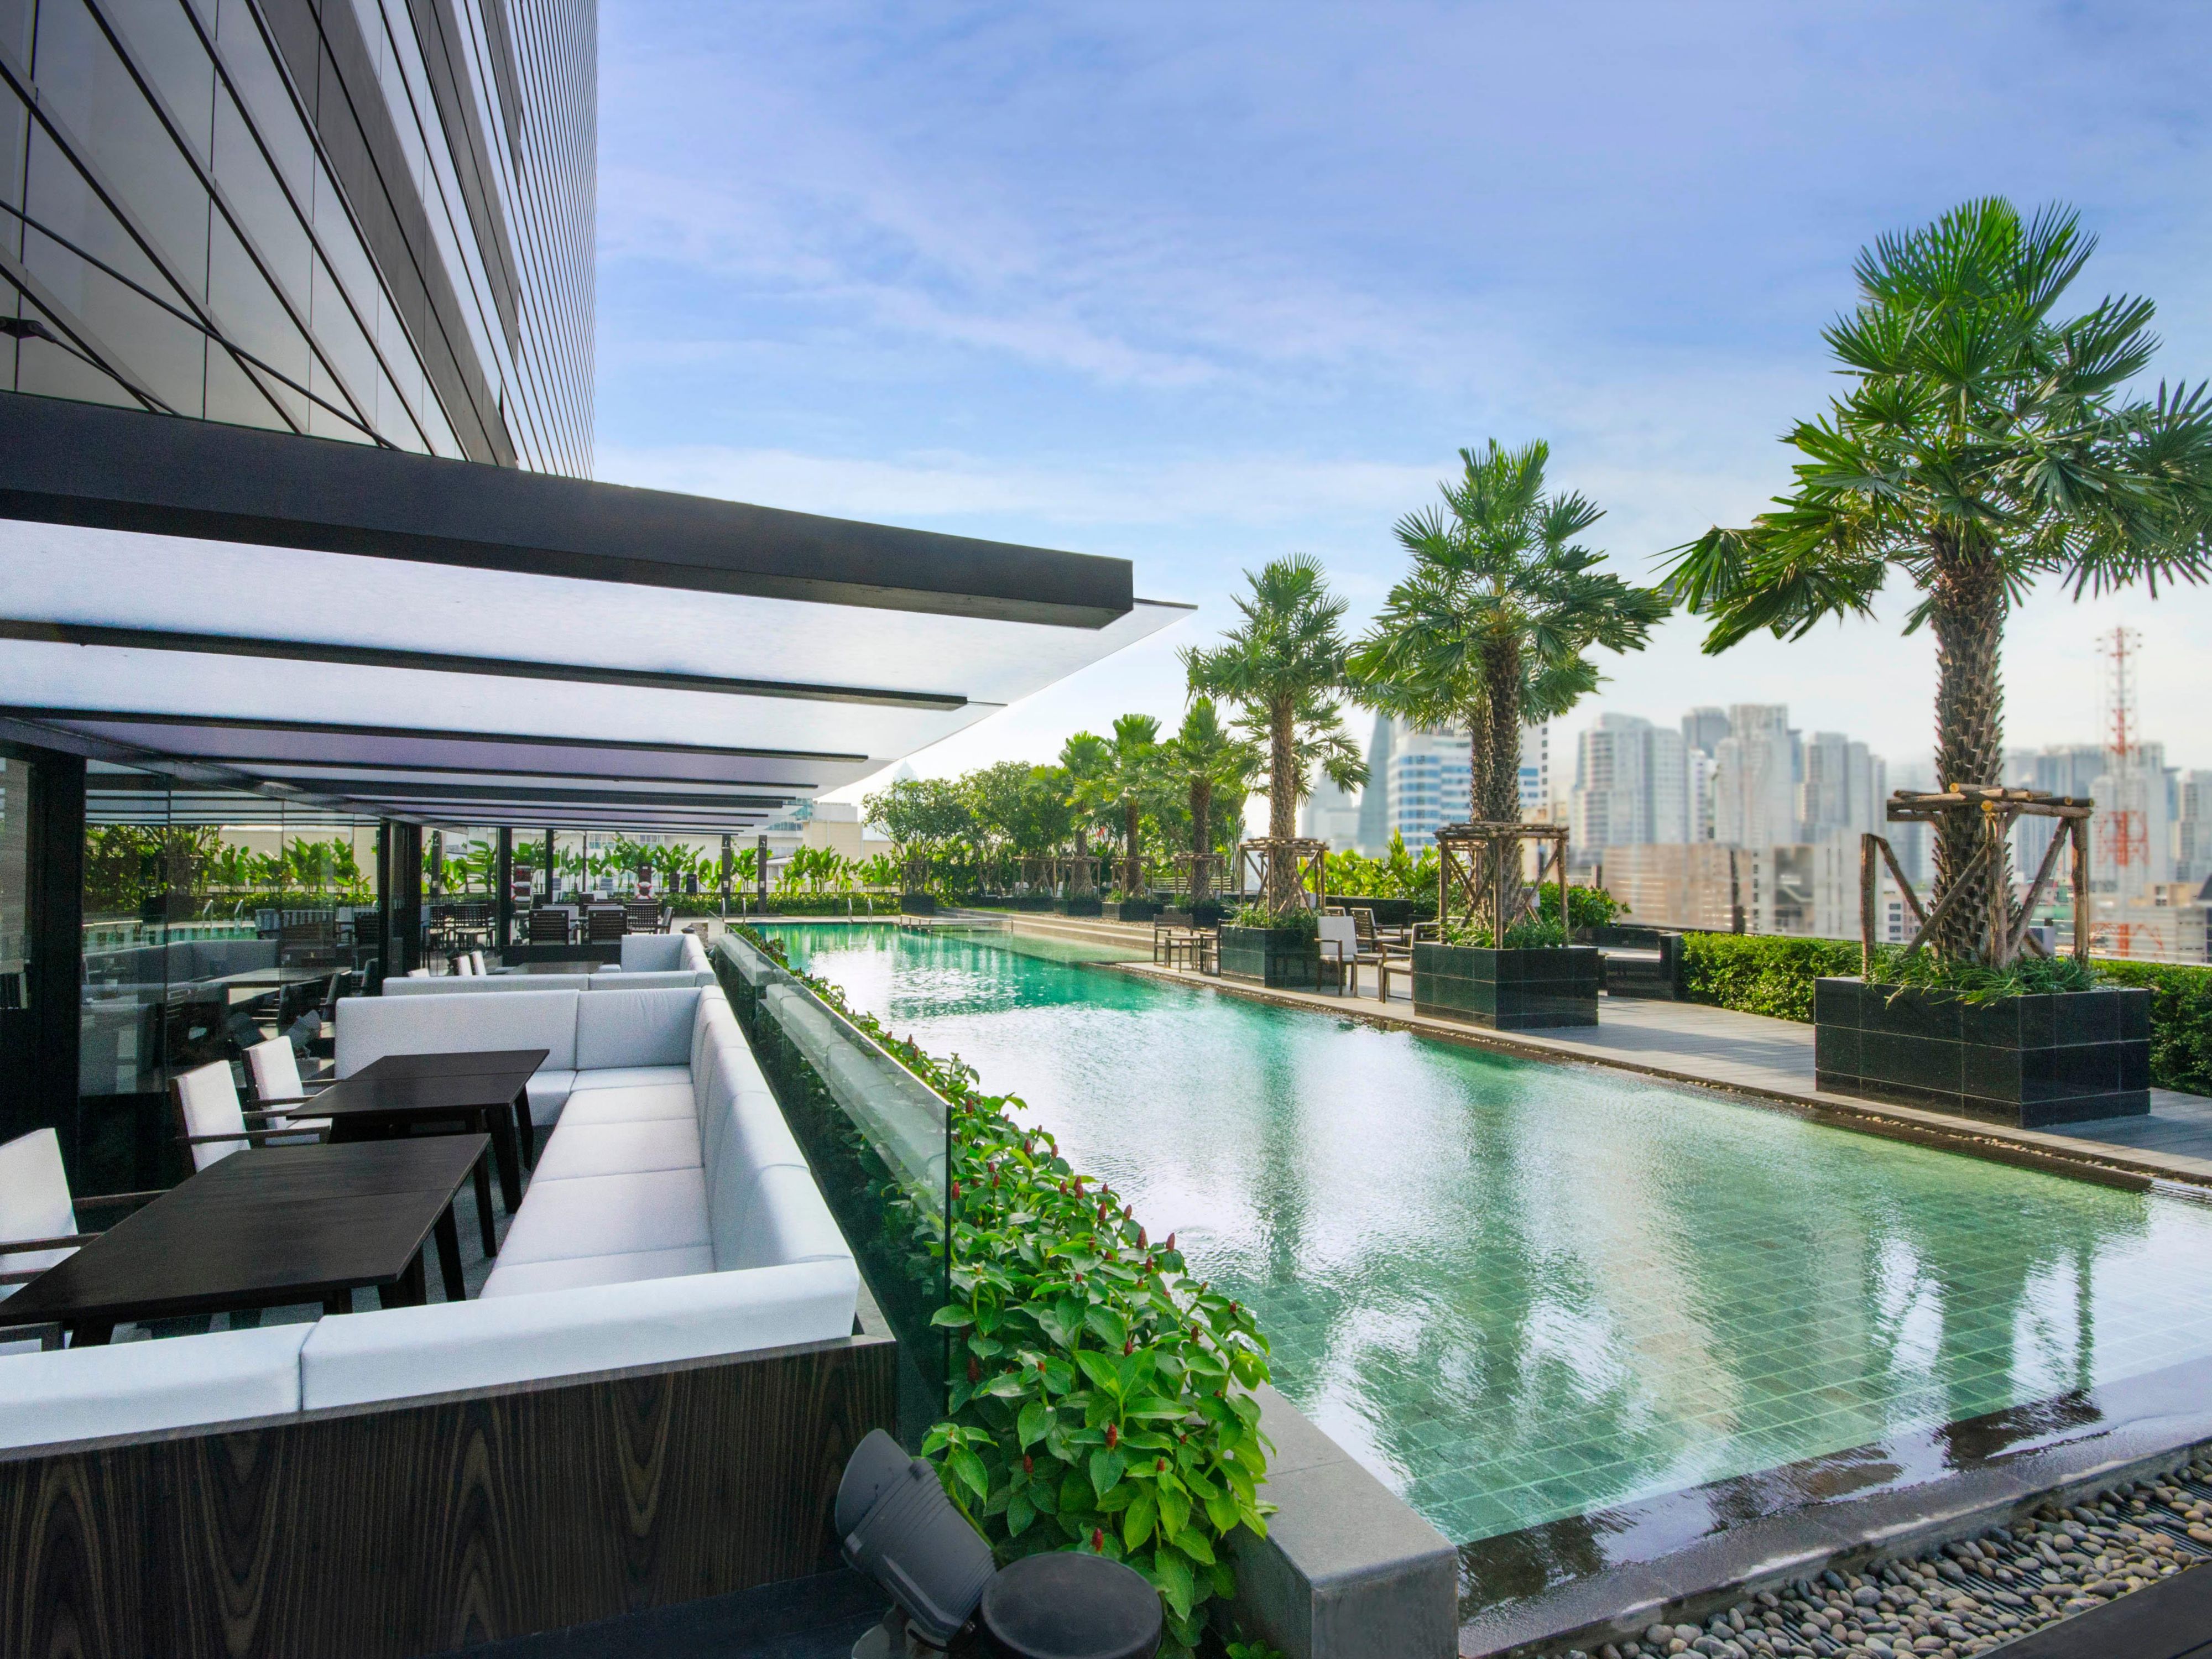 Located on the 8th floor, our expansive outdoor pool offers a refreshing experience far from Bangkok’s hustle and bustle. Catch some chill time and take in some rays of sun on lounger, cool off with a dip, or enjoy a drink or a light snack. The joy of fun and relaxation for all the family, a great place to spend Bangkok afternoon.